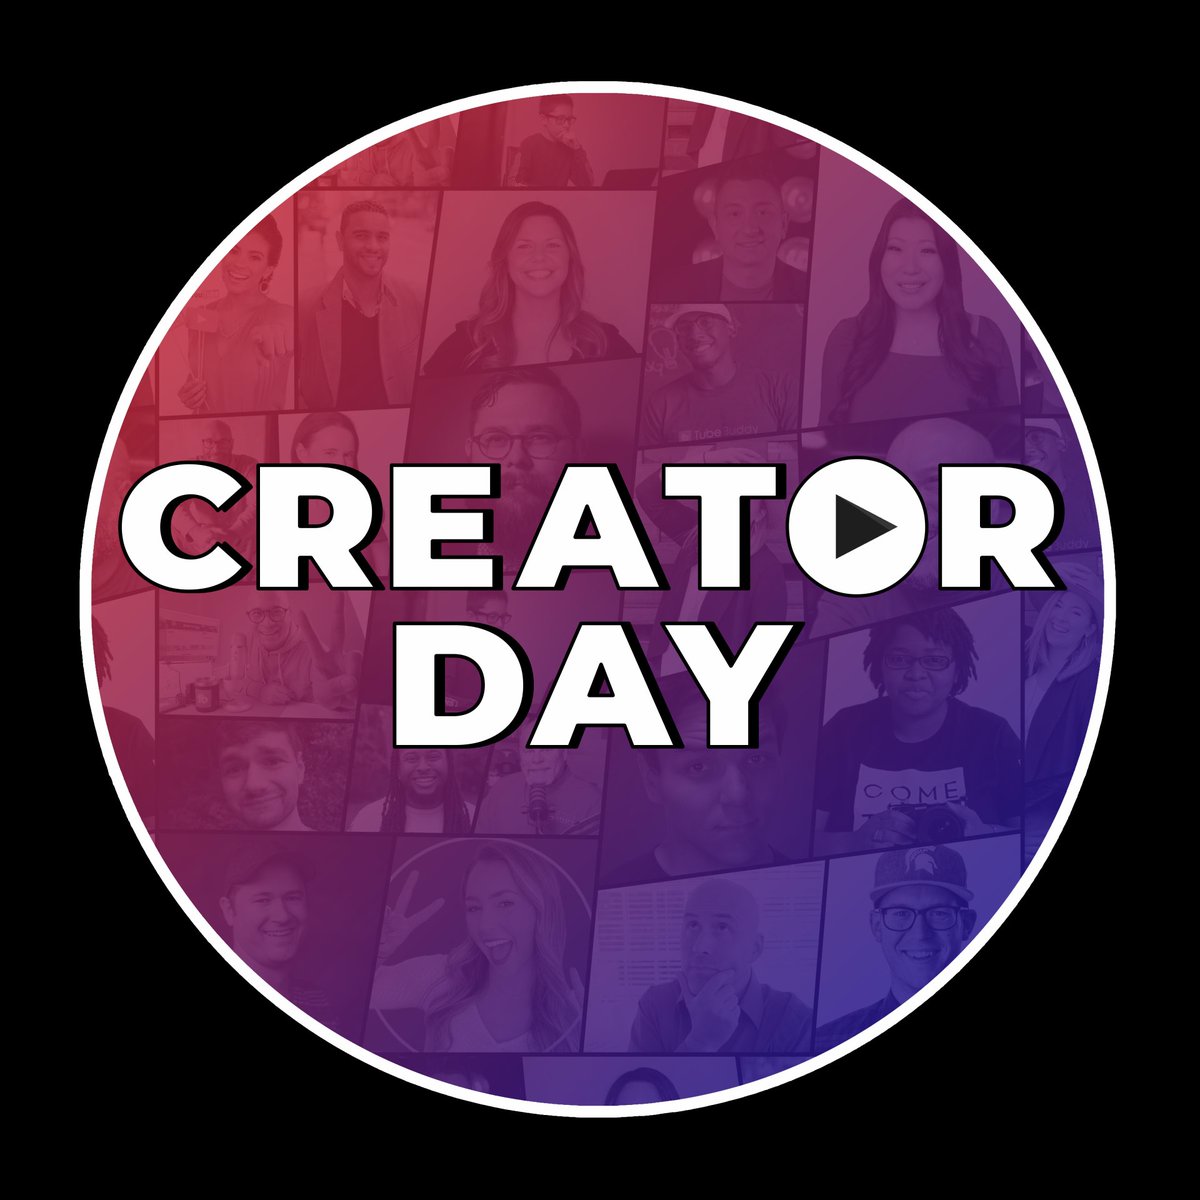 When is International Creator Day? International Creator Day is celebrated on April 23 every year. In 2024 International Creator Day will occur on a Tuesday. Sounds like a BTS day for podcasting?